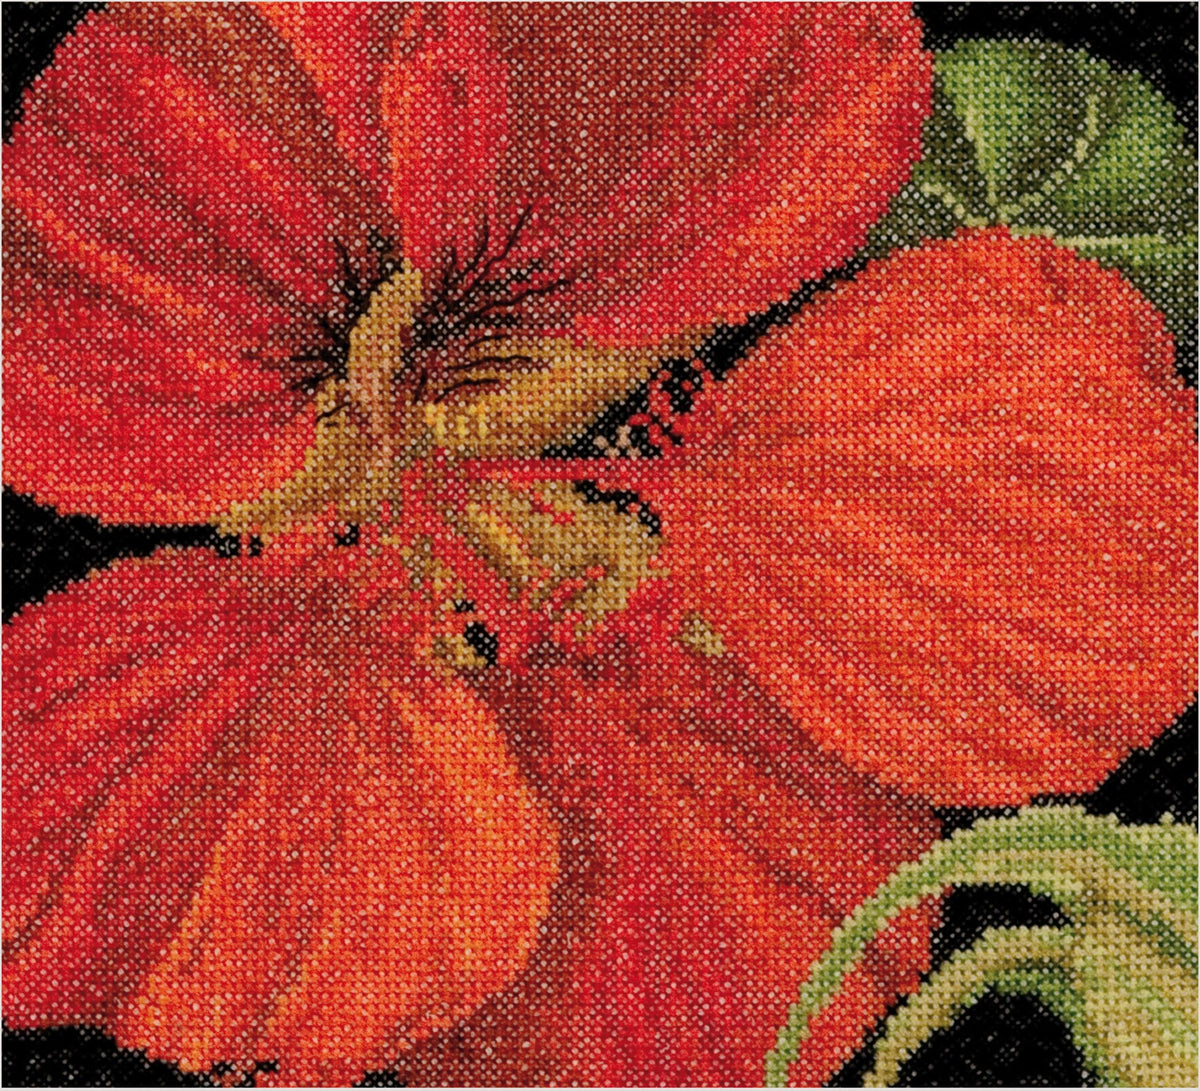 Thea Gouverneur - Counted Cross Stitch Kit - East Indian Cherry - Aida - 18 count - 492A - Thea Gouverneur Since 1959